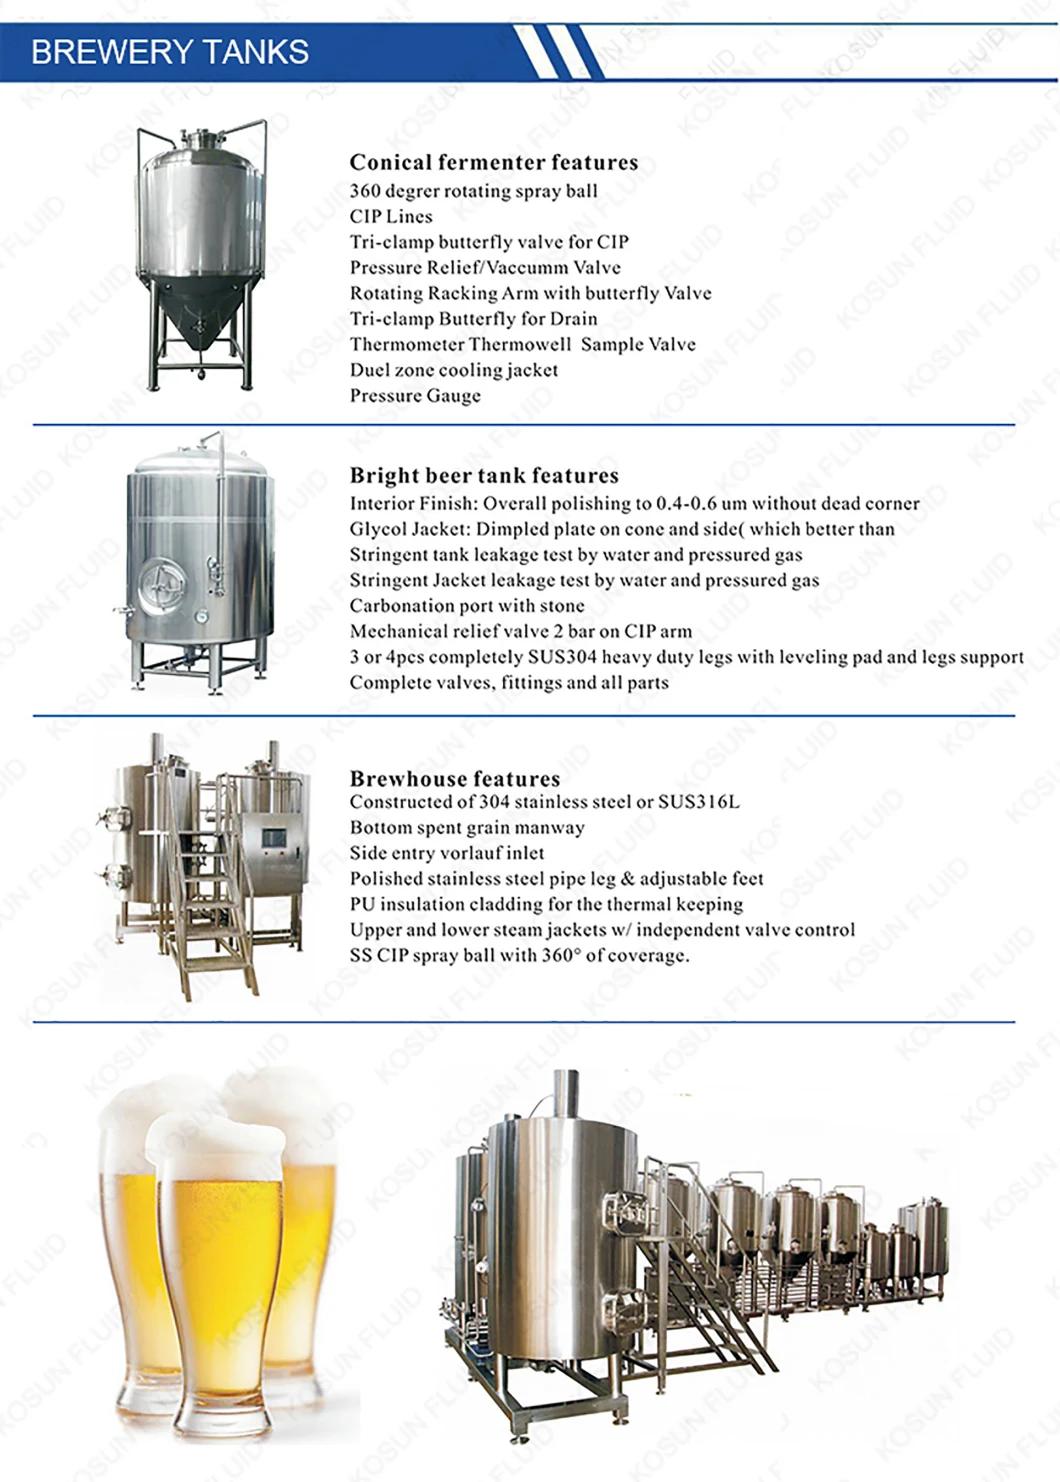 1000L 10hl 20hl Large and Small Mini Beer Brewery Equipment